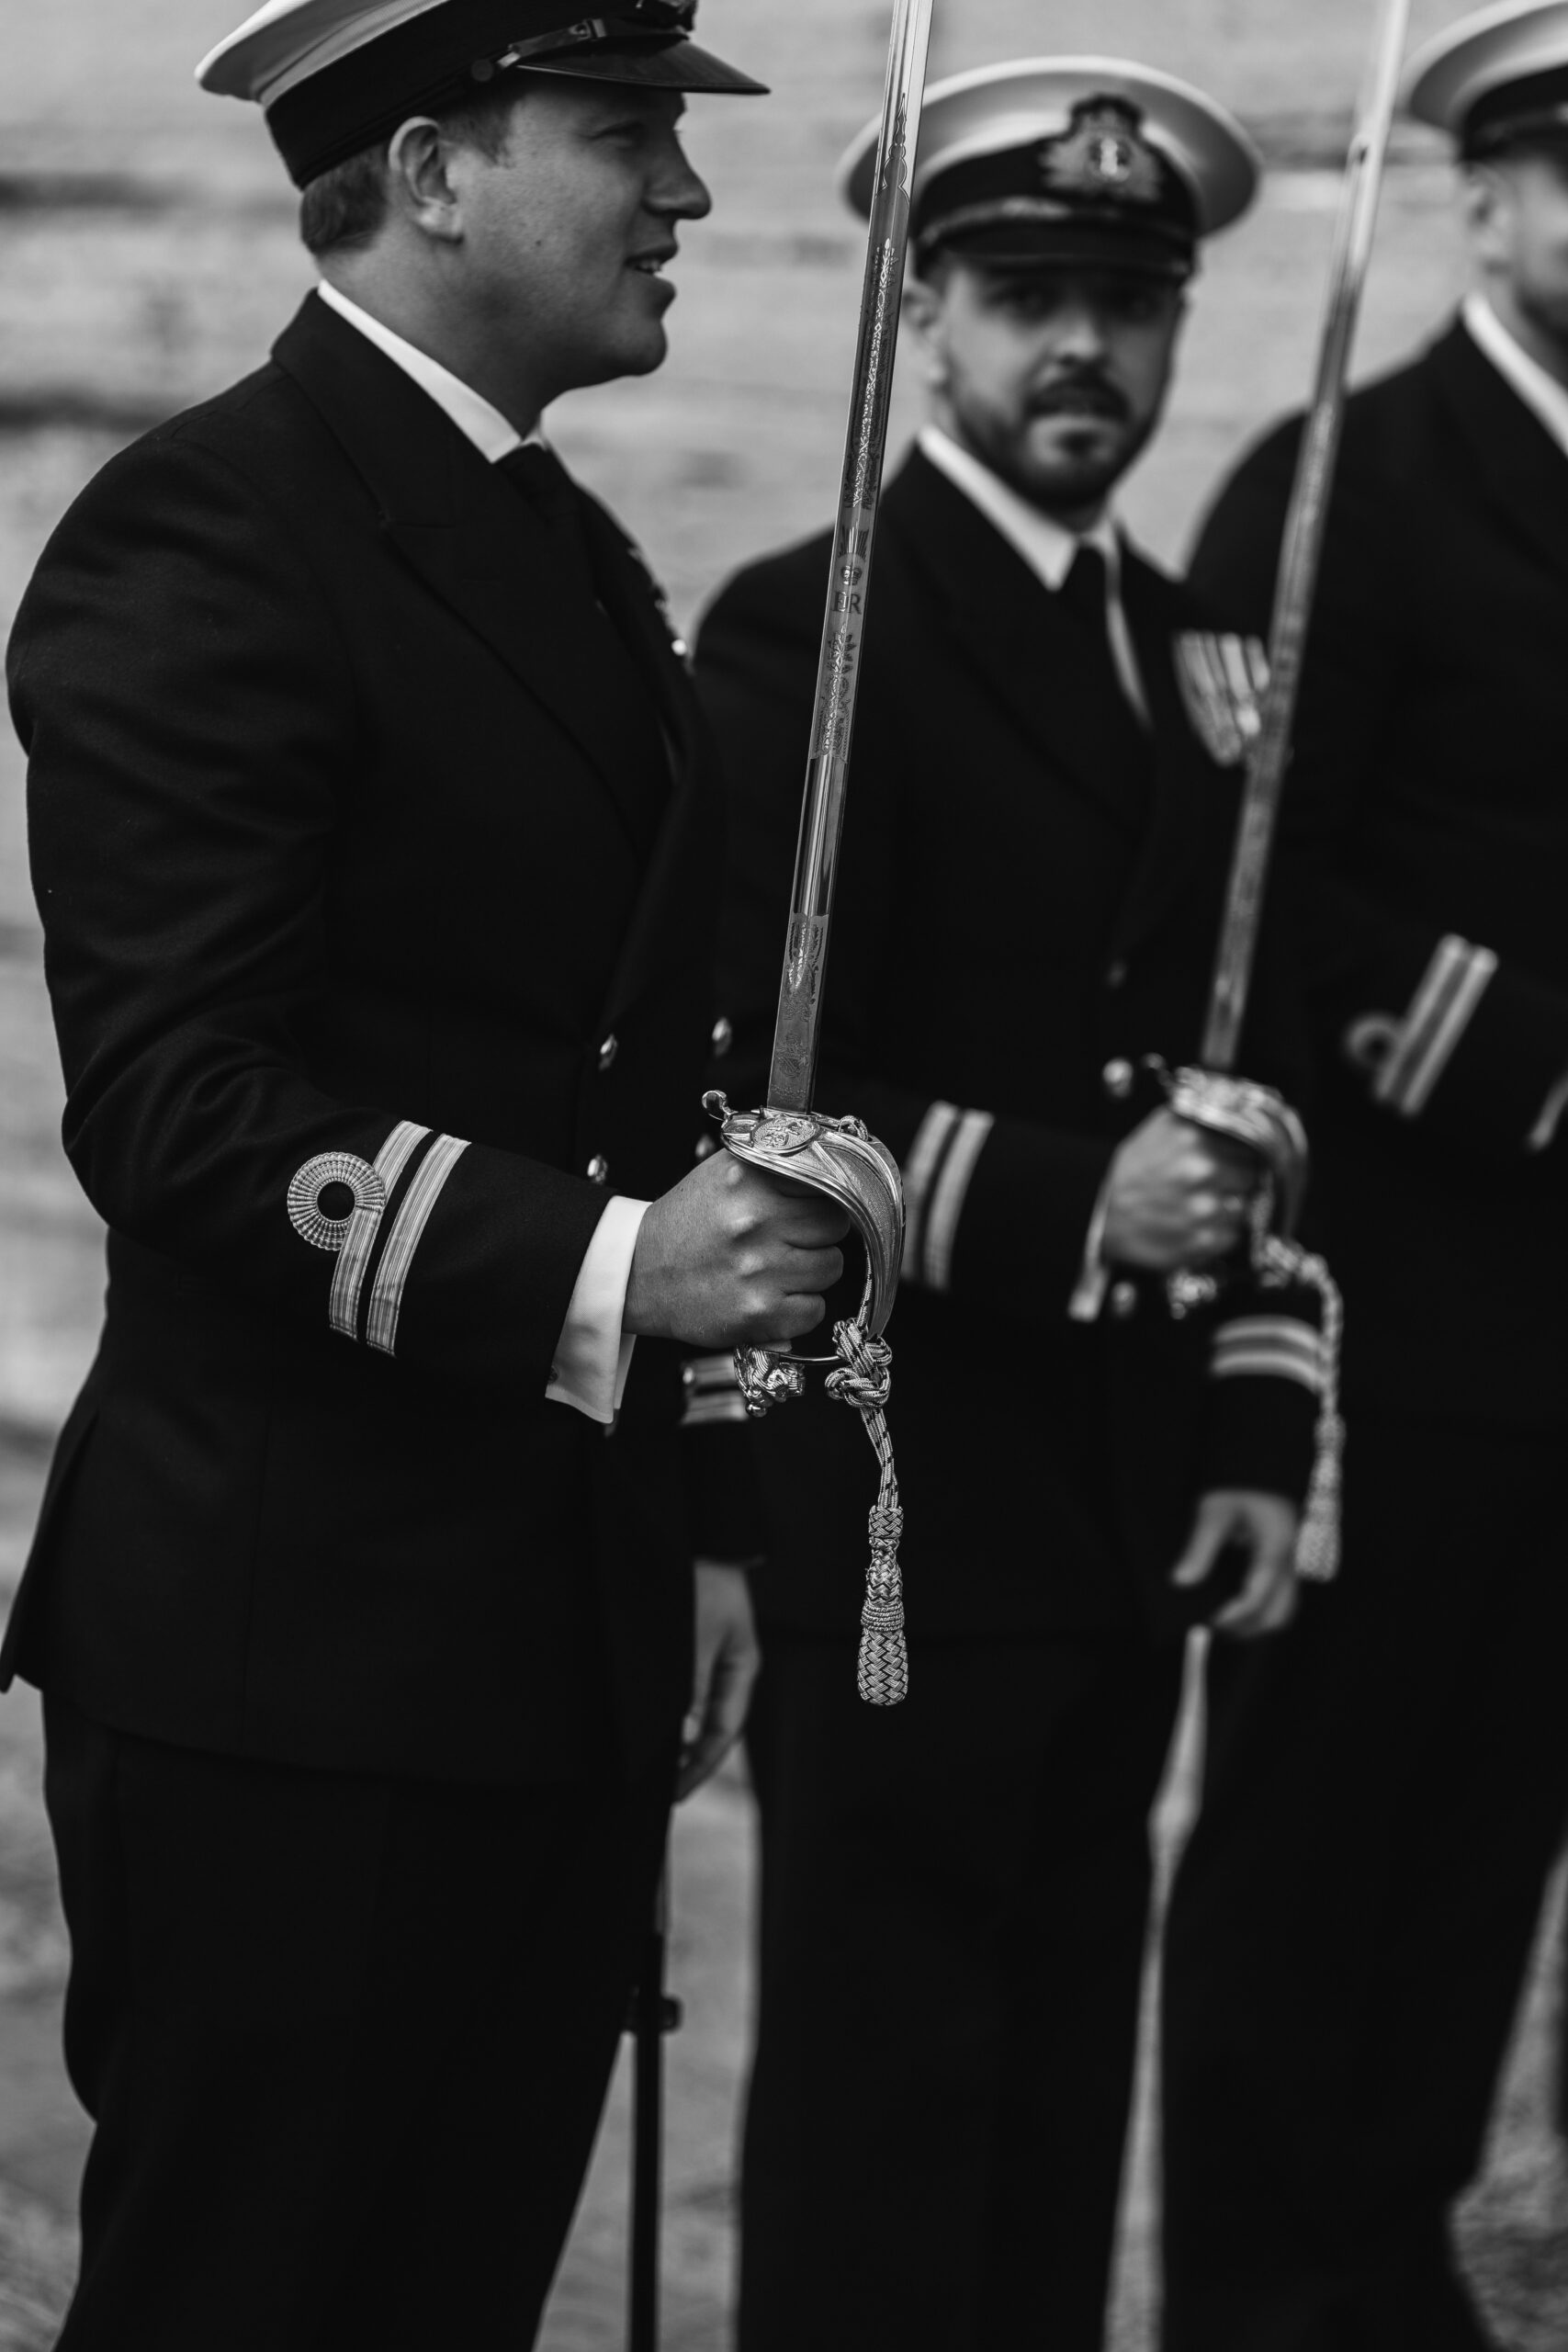 A Navy wedding at The Square Tower Portsmouth